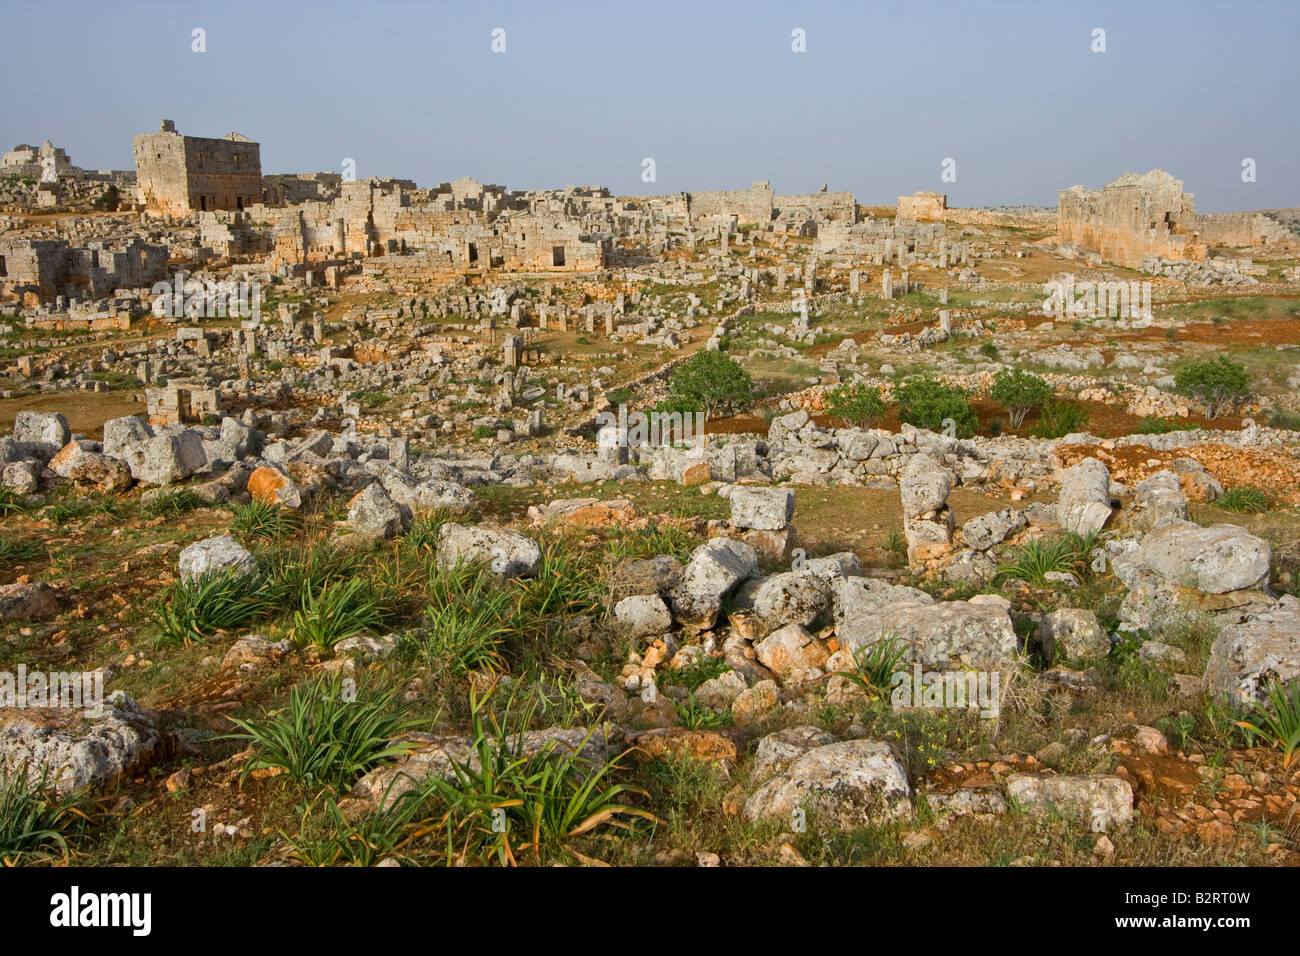 Ruins at Serjilla one of the Ancient Roman Dead Cities in Syria Stock Photo